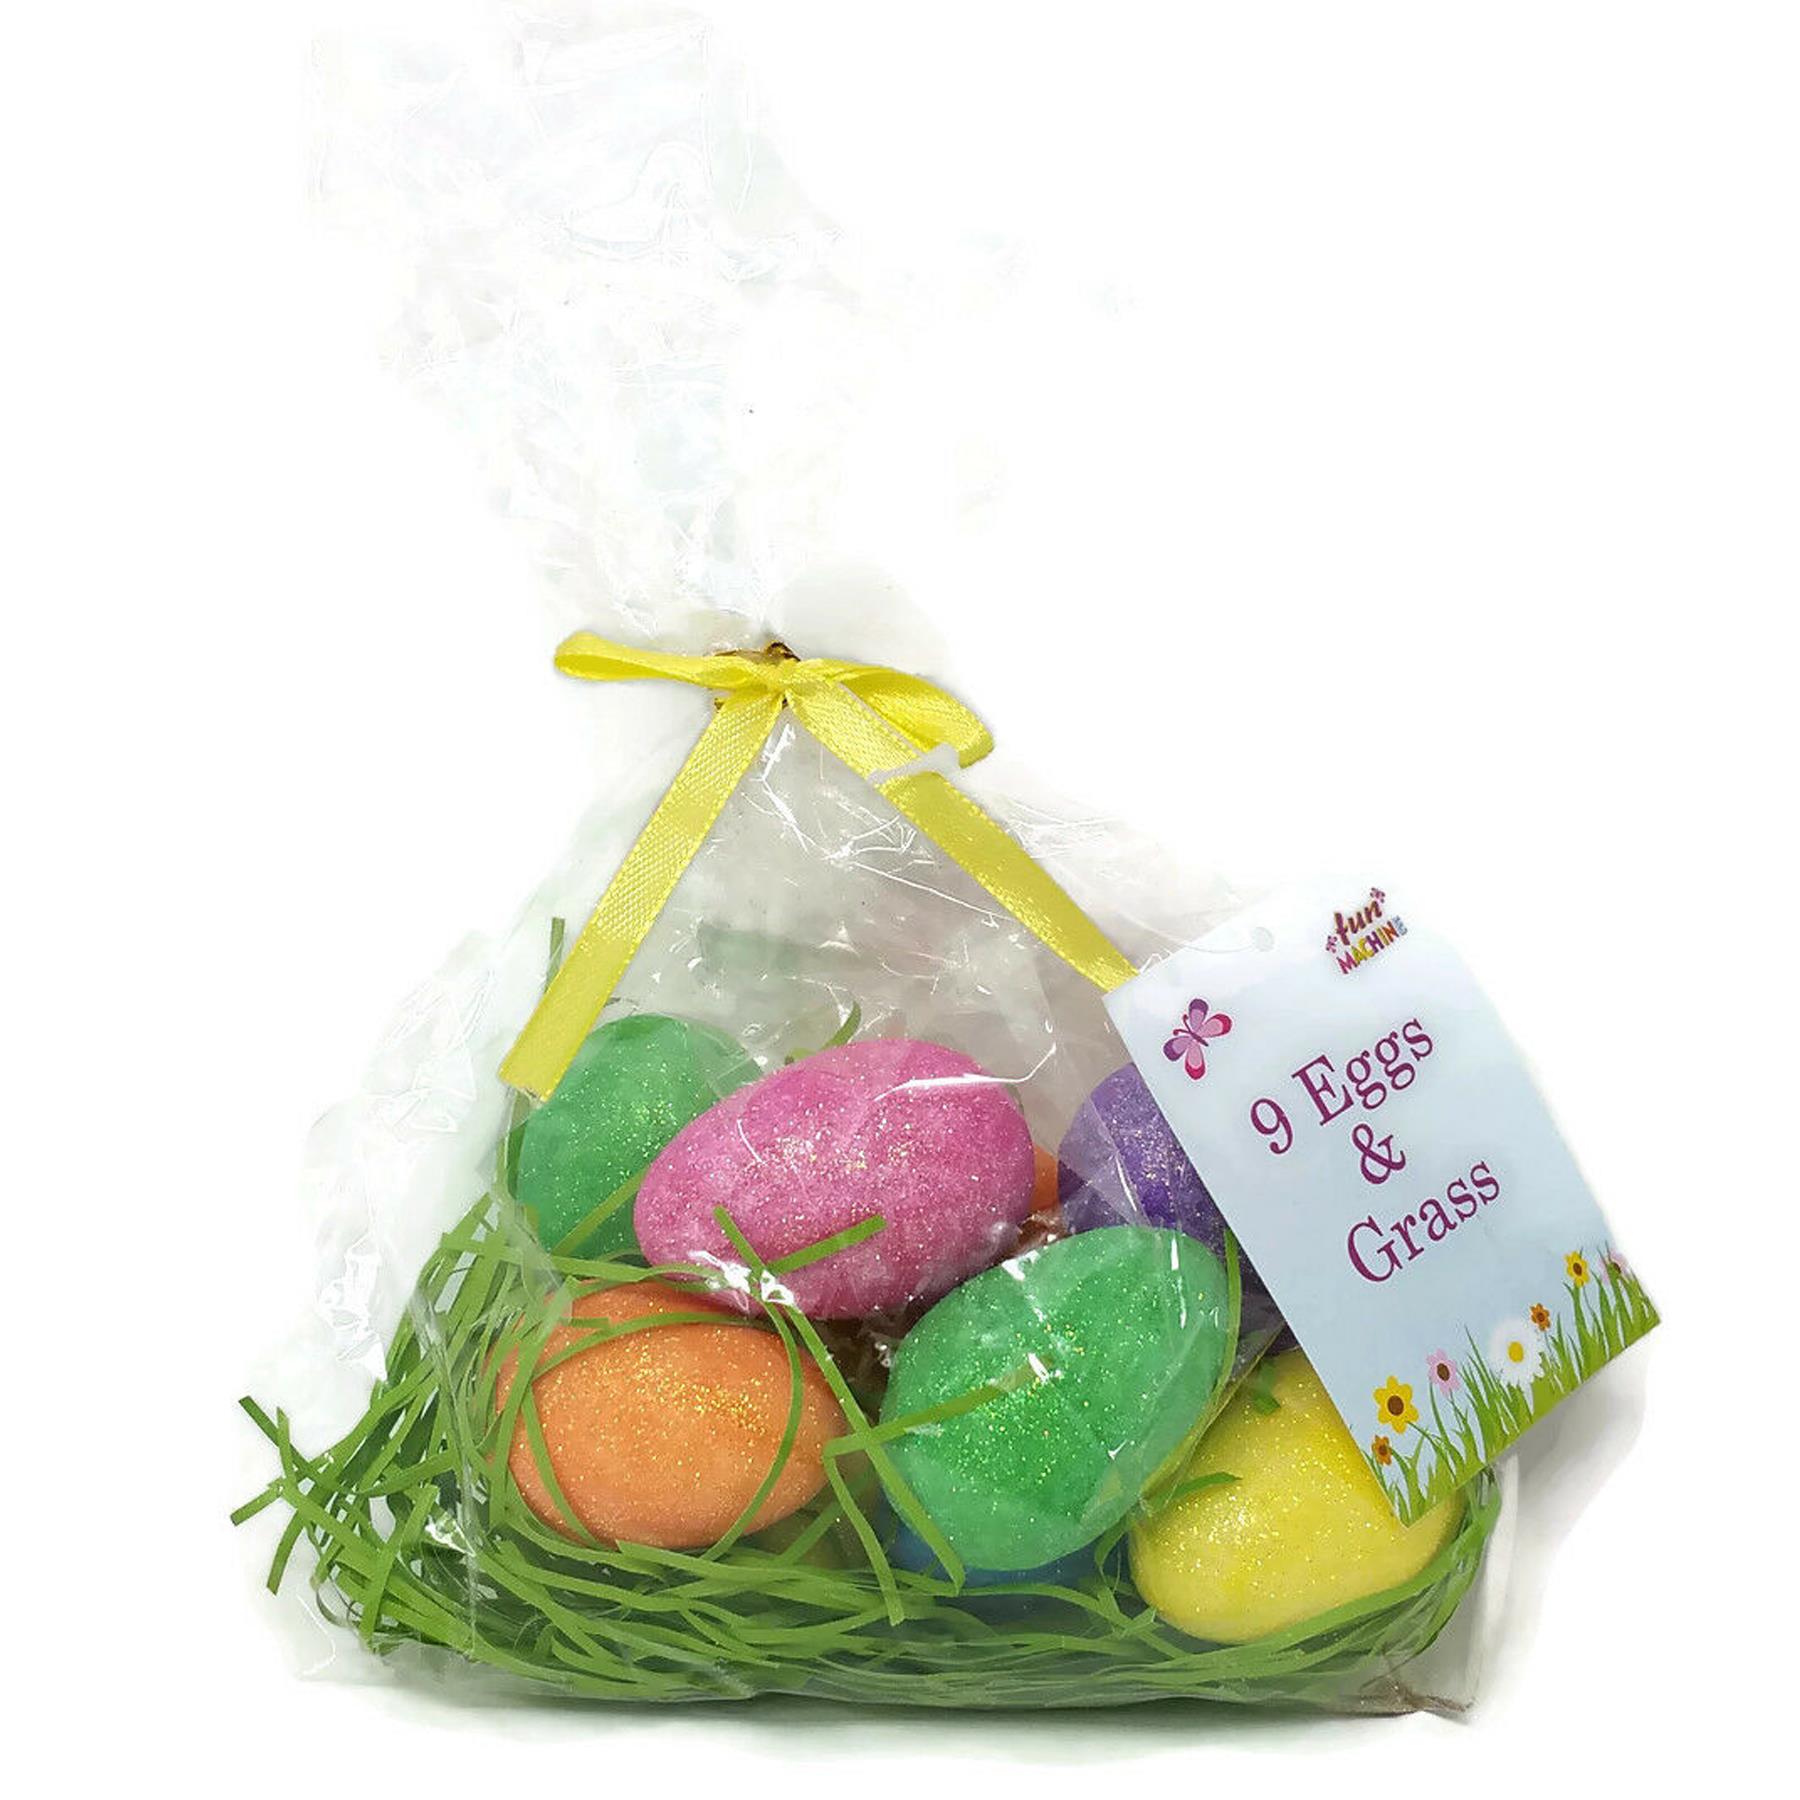 Easter Decorations, Bonnet Arts and Crafts, Egg Hunt - 9 Glitter Eggs with Grass